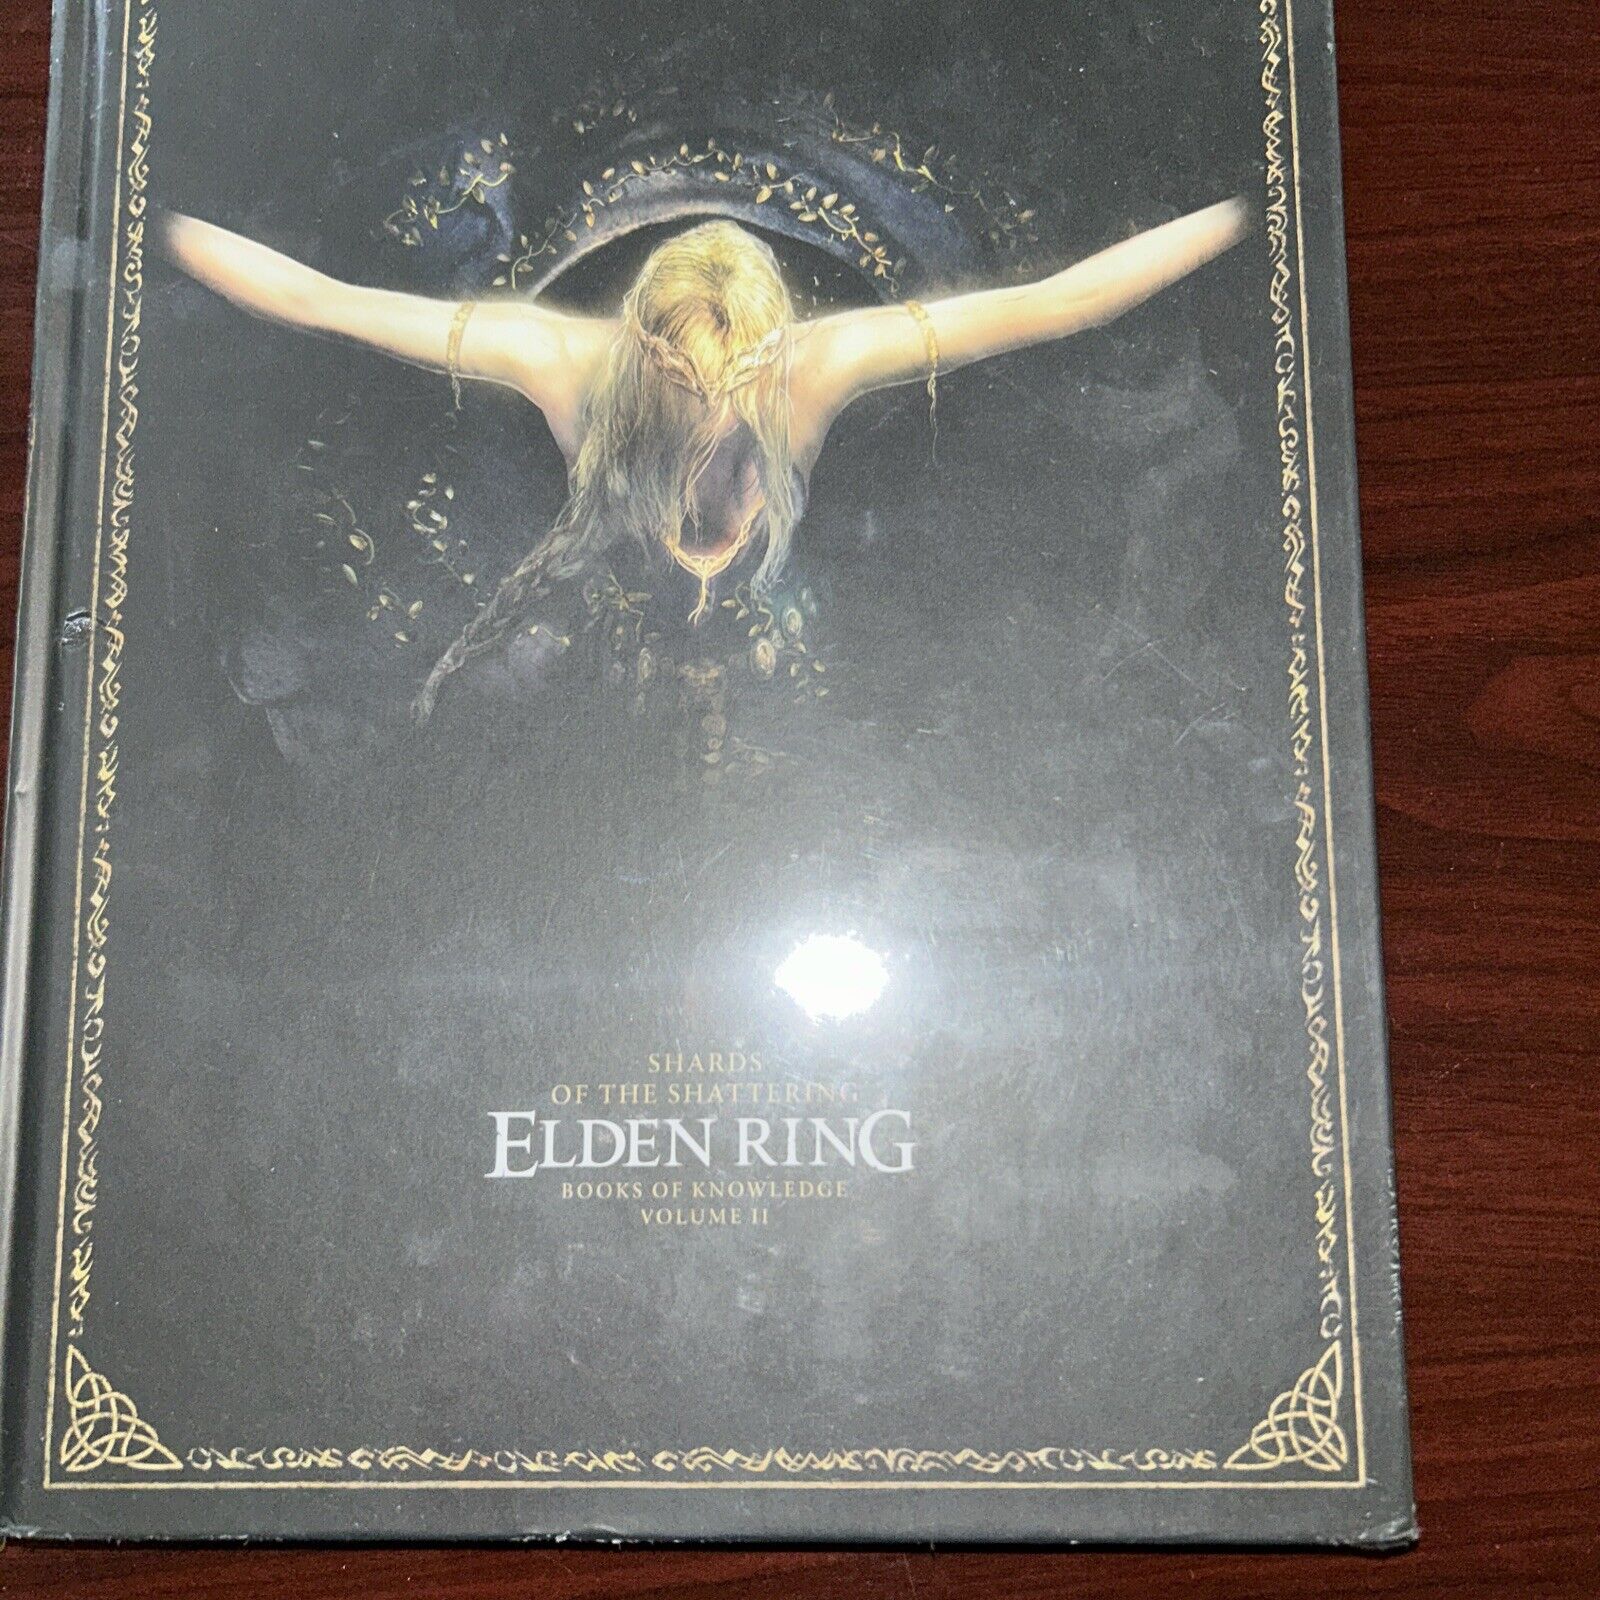 Elden Ring Official Strategy Guide, Vol. 2: Shards of the Shattering by Future P